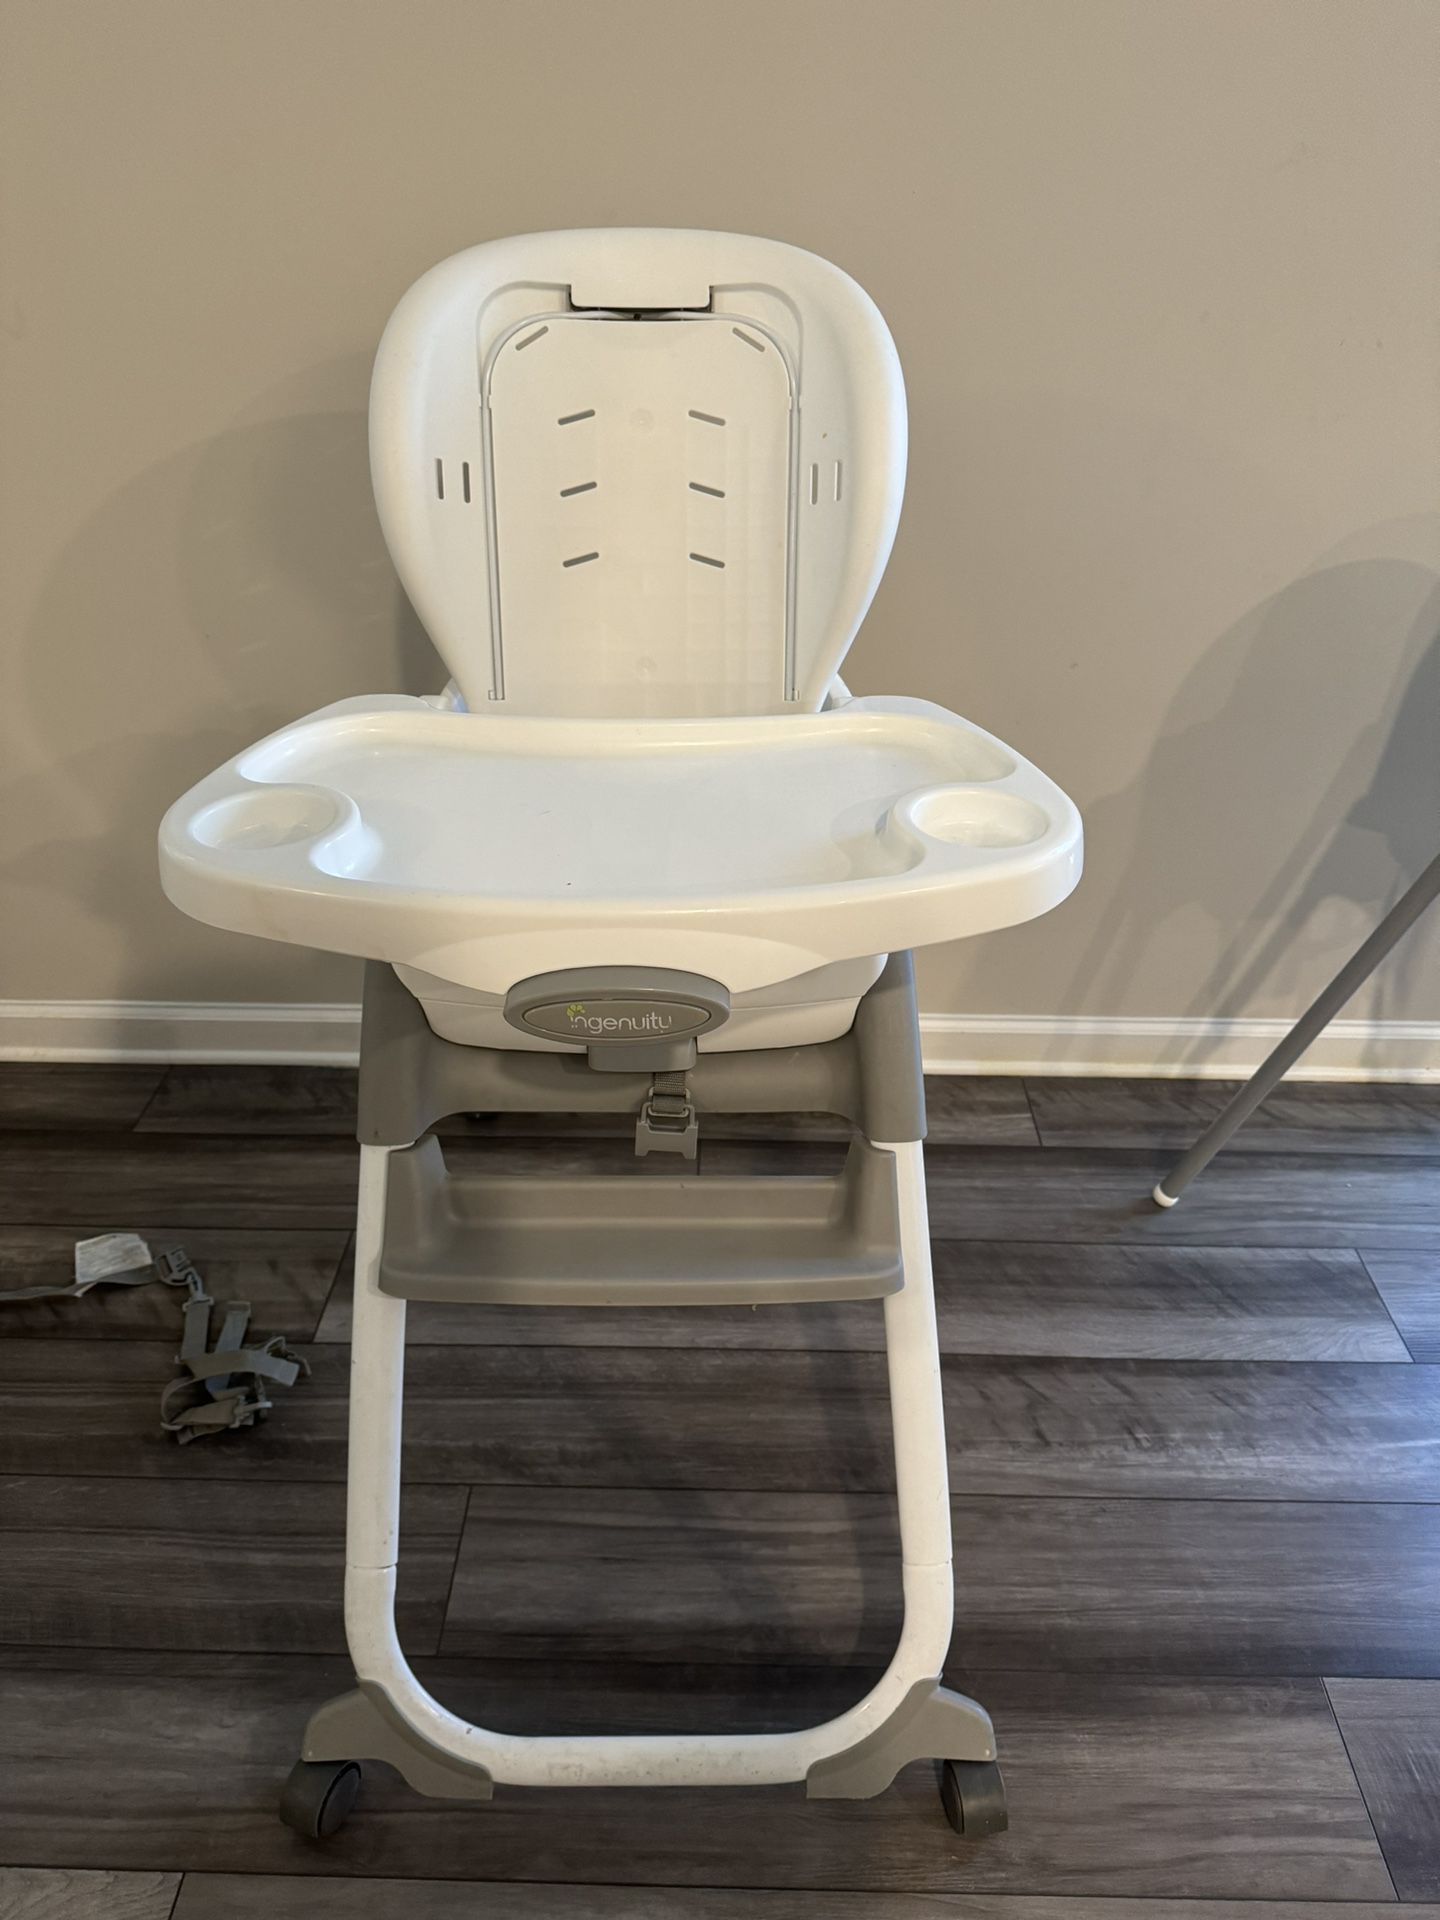 High Chair For Sale 